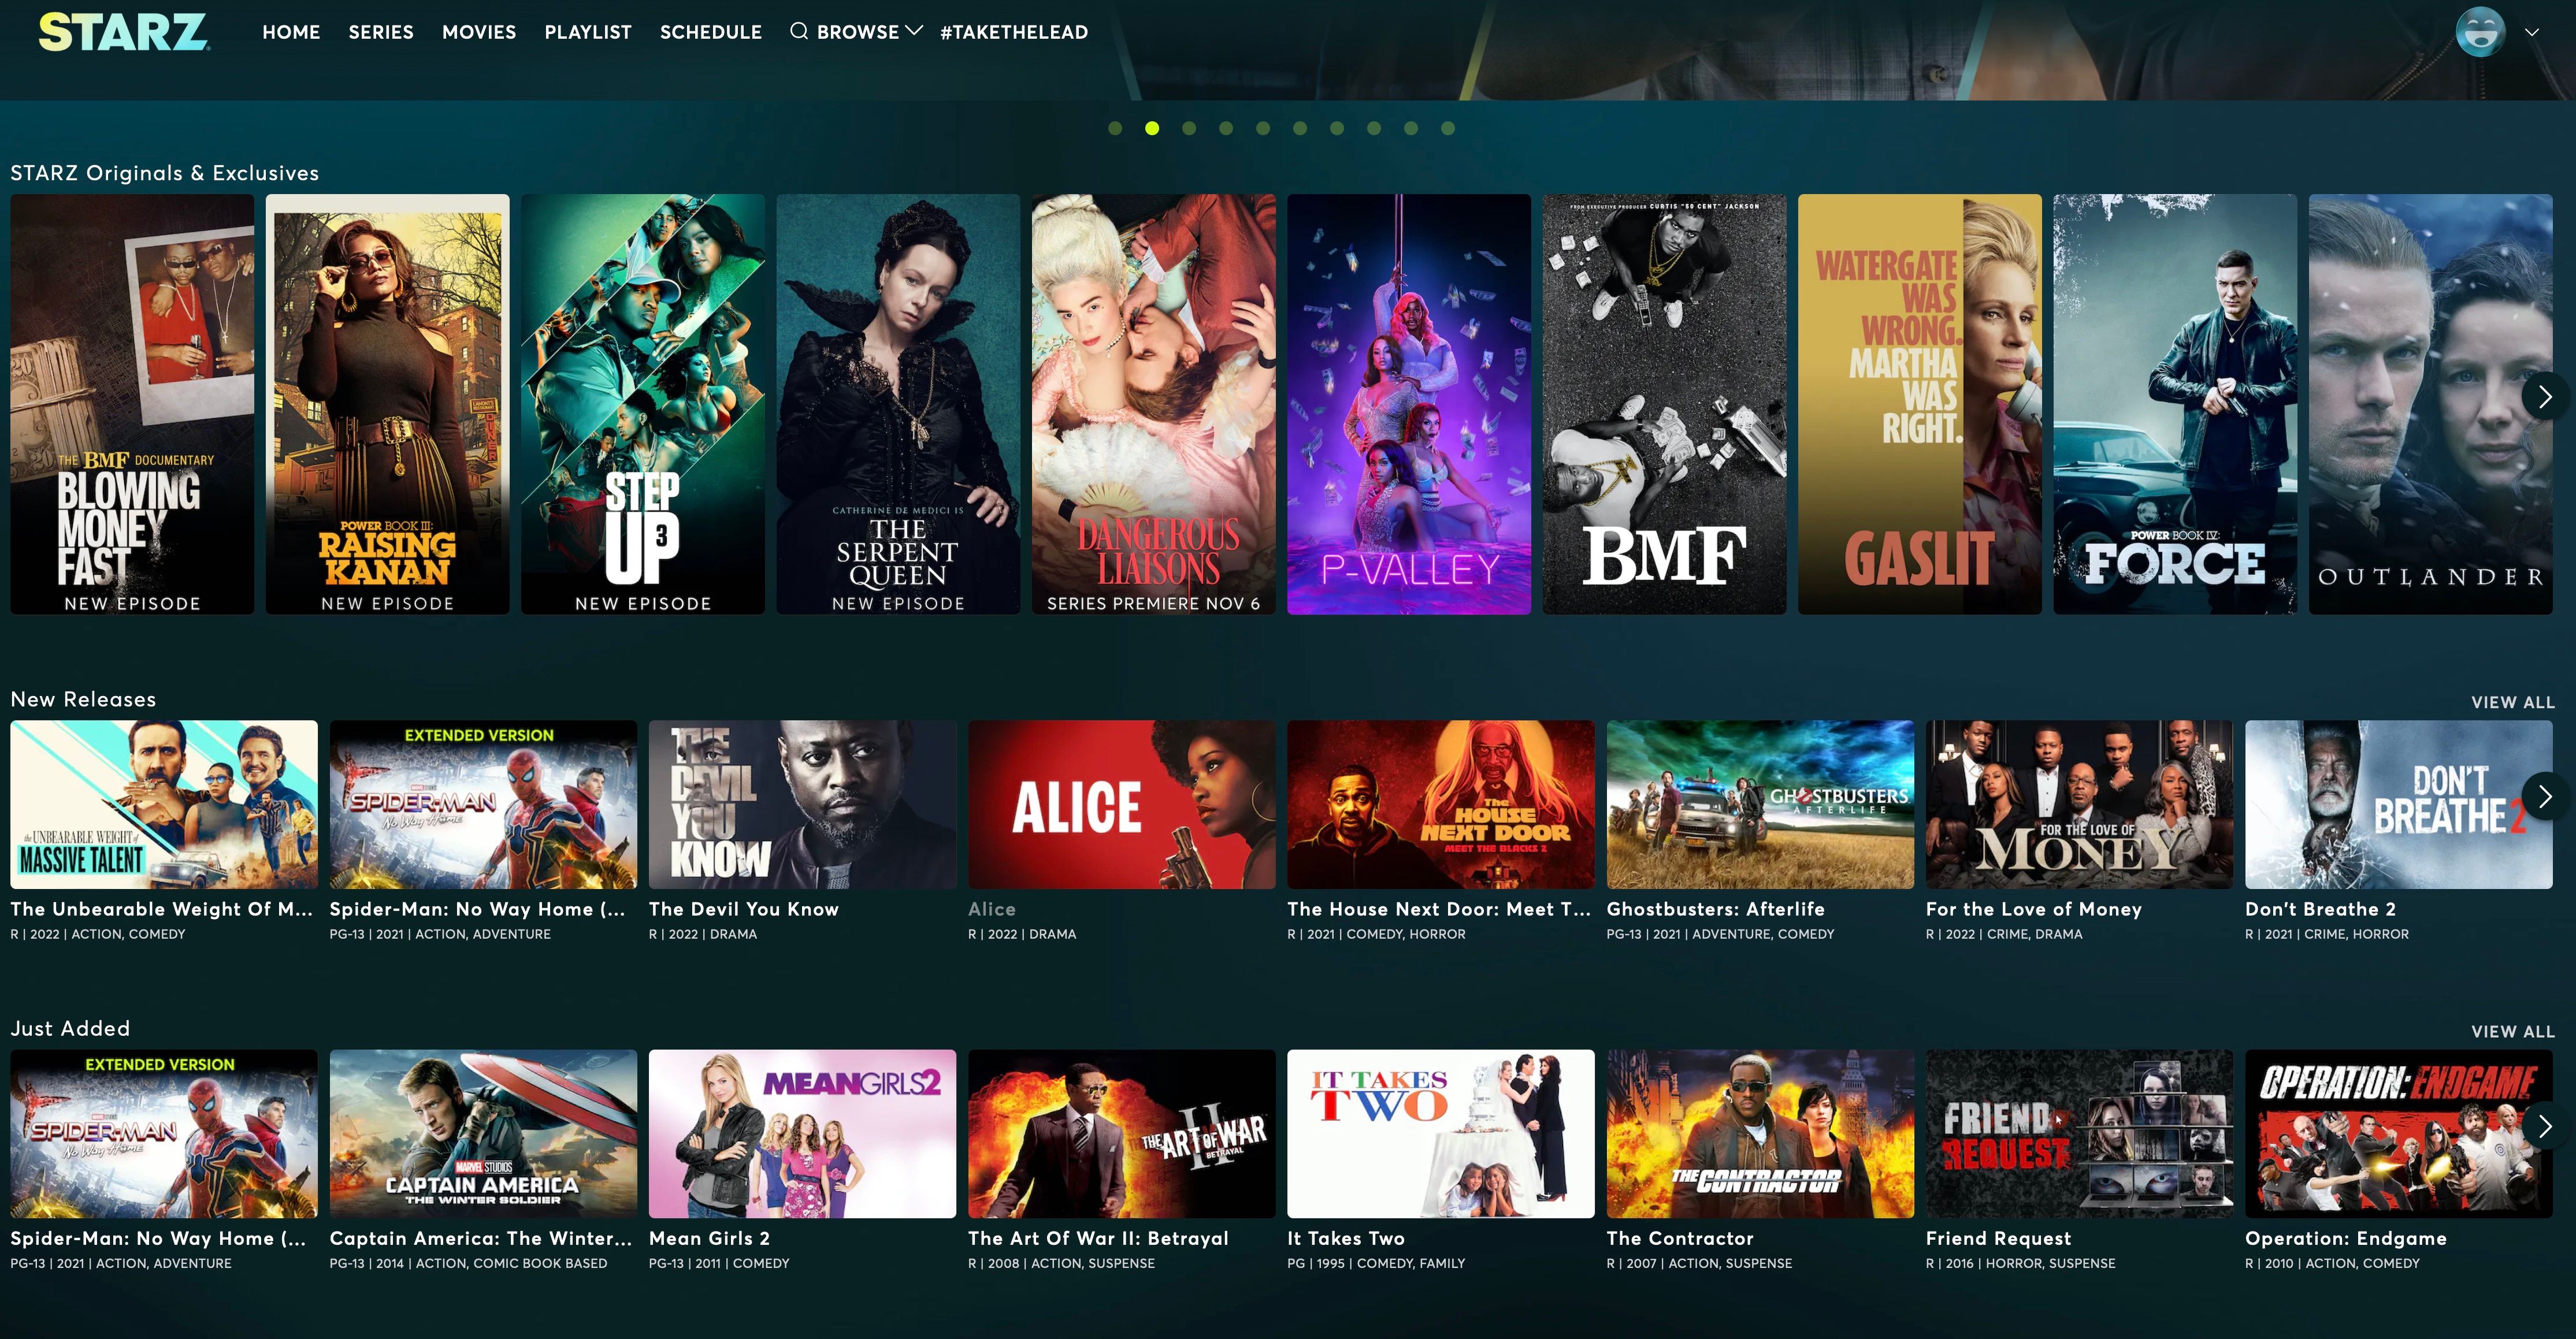 Starz Home Page with Starz Originals, New Releases, and Just Added tabs.